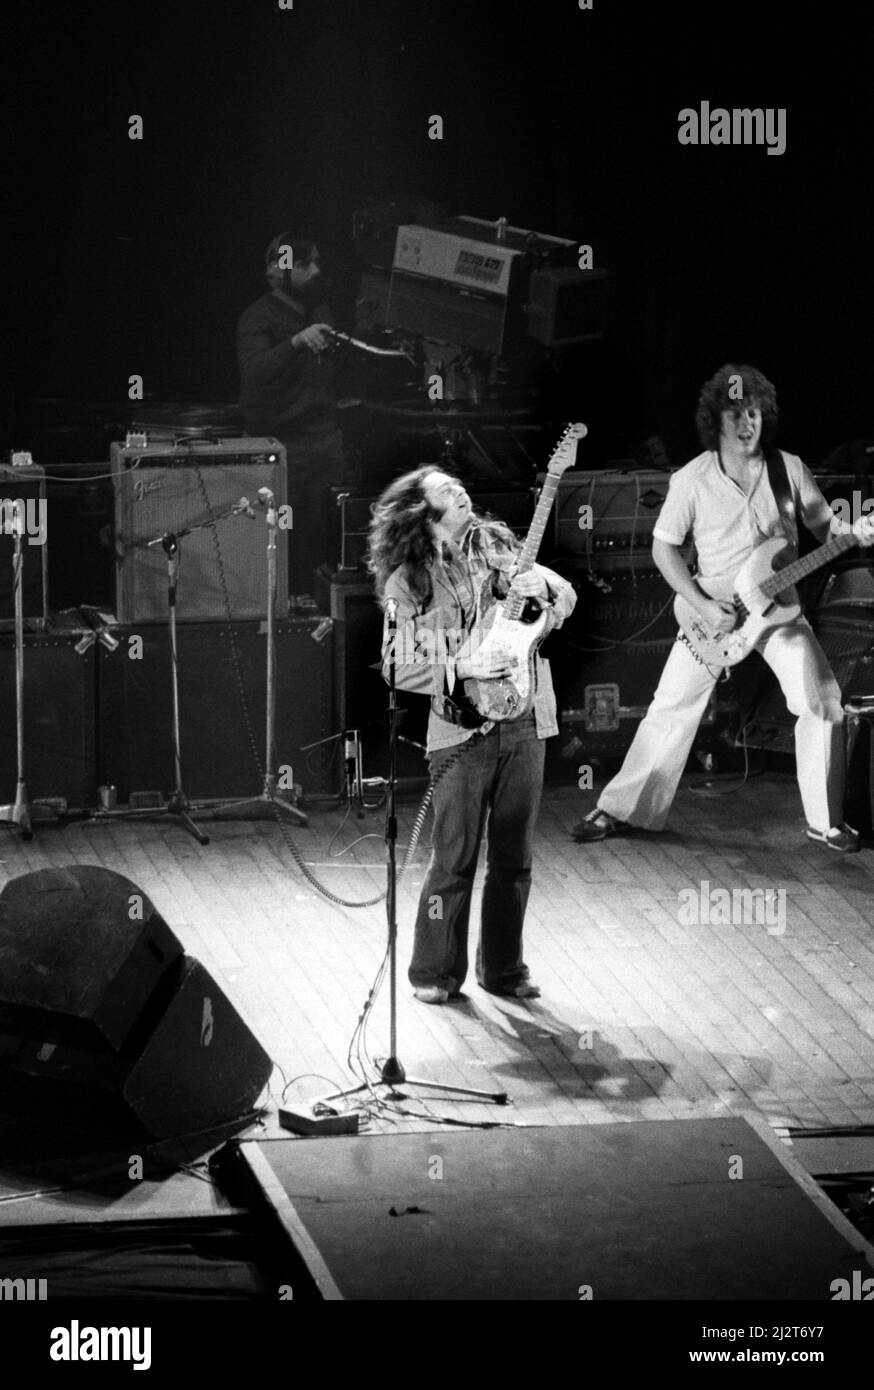 Irish blues/rock guitarist and singer Rory Gallagher at the Lyceum Theatre, London, England in 1977. Stock Photo